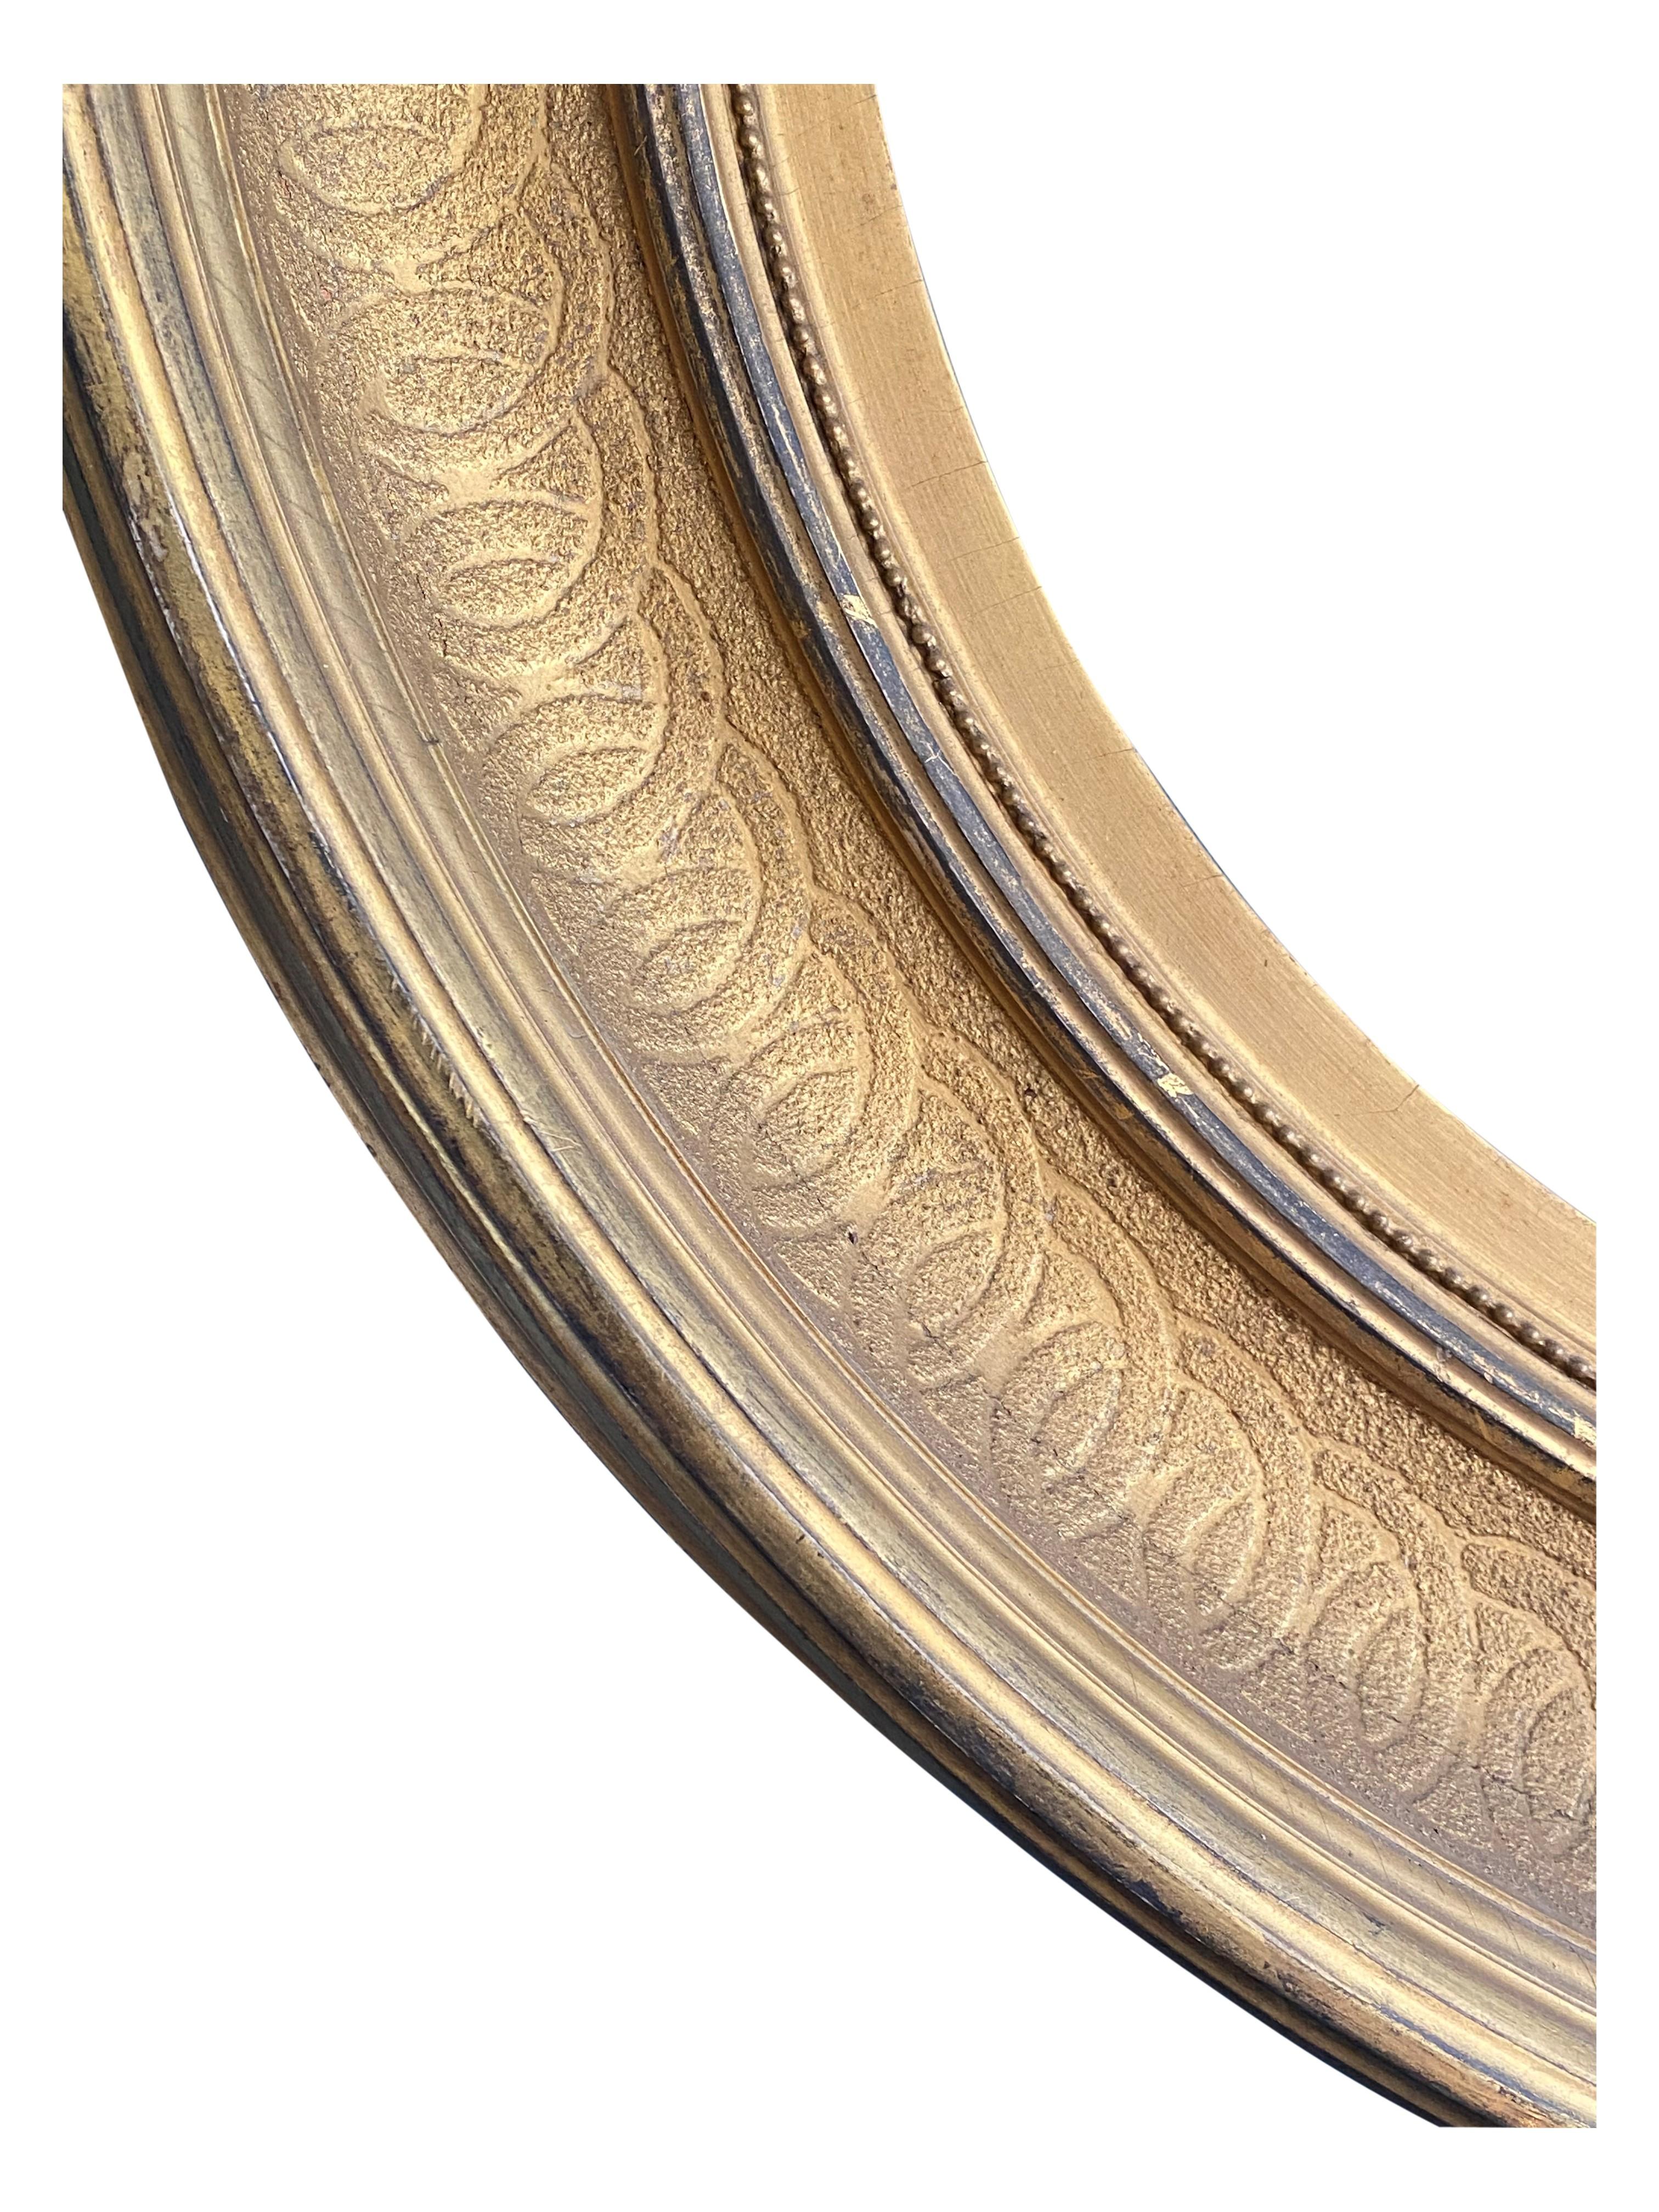 Sadly lacking the mirror plate although this could be used as a very elegant circular picture frame. Having incised ornament and much of the original gold leaf. Note never had peripheral elements. Diameter of mirror plate would be about 20